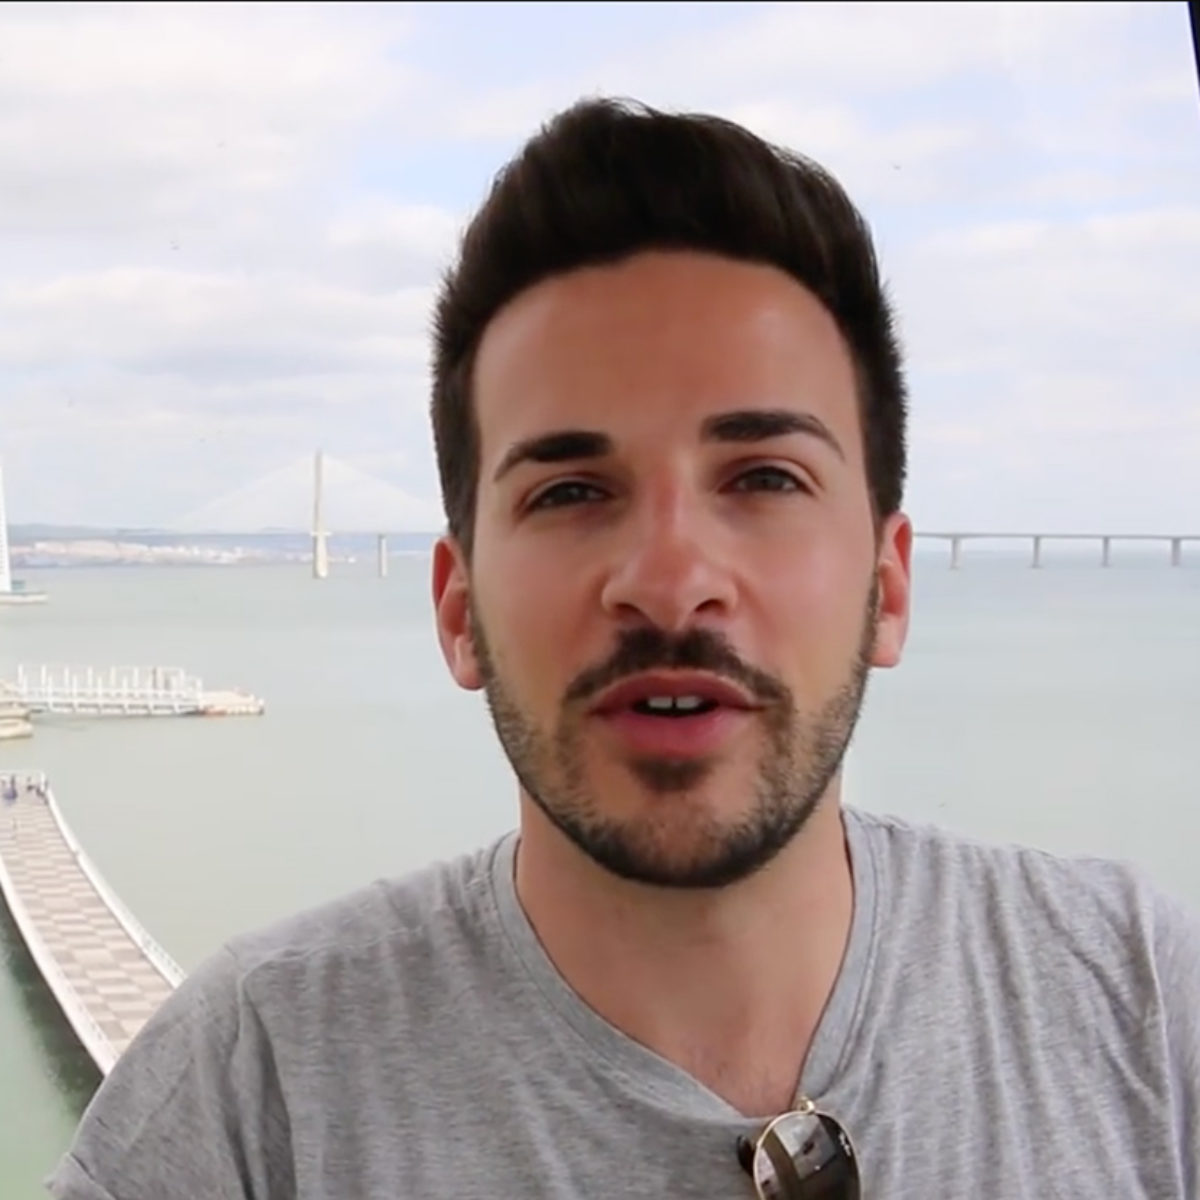 Marco in a Box - youtuber talking about his experience in Lisbon